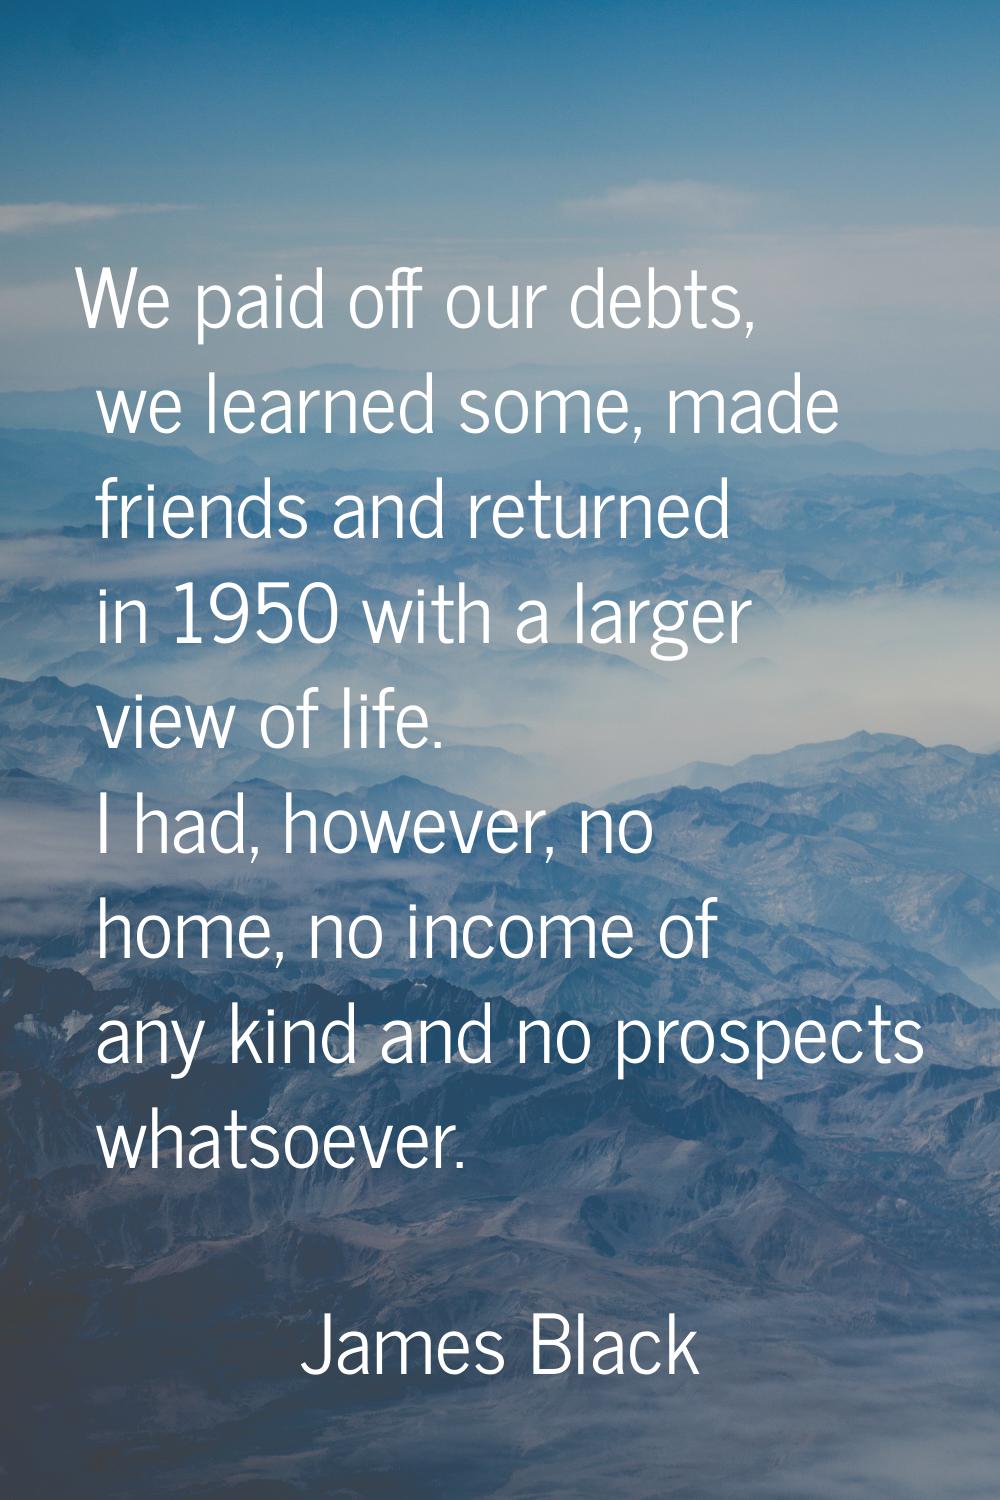 We paid off our debts, we learned some, made friends and returned in 1950 with a larger view of lif